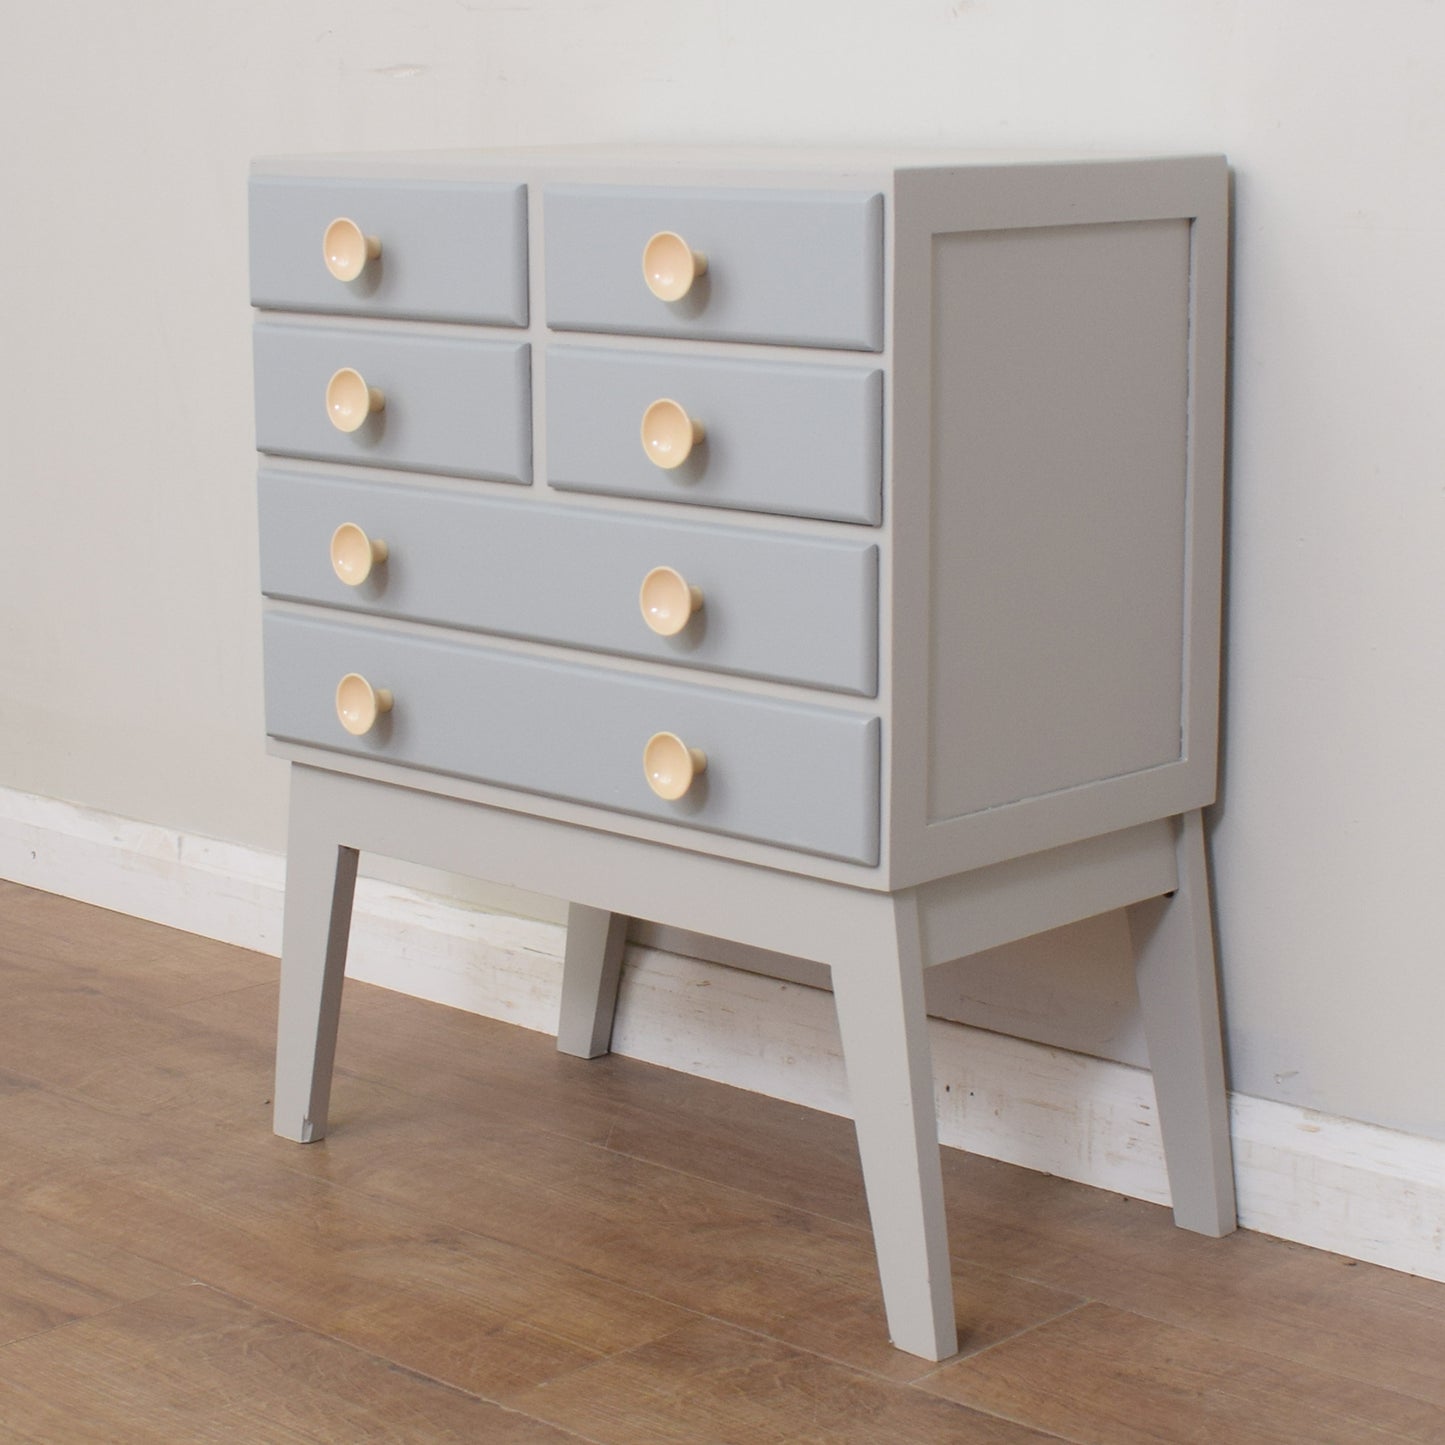 Painted Retro Chest Of Drawers